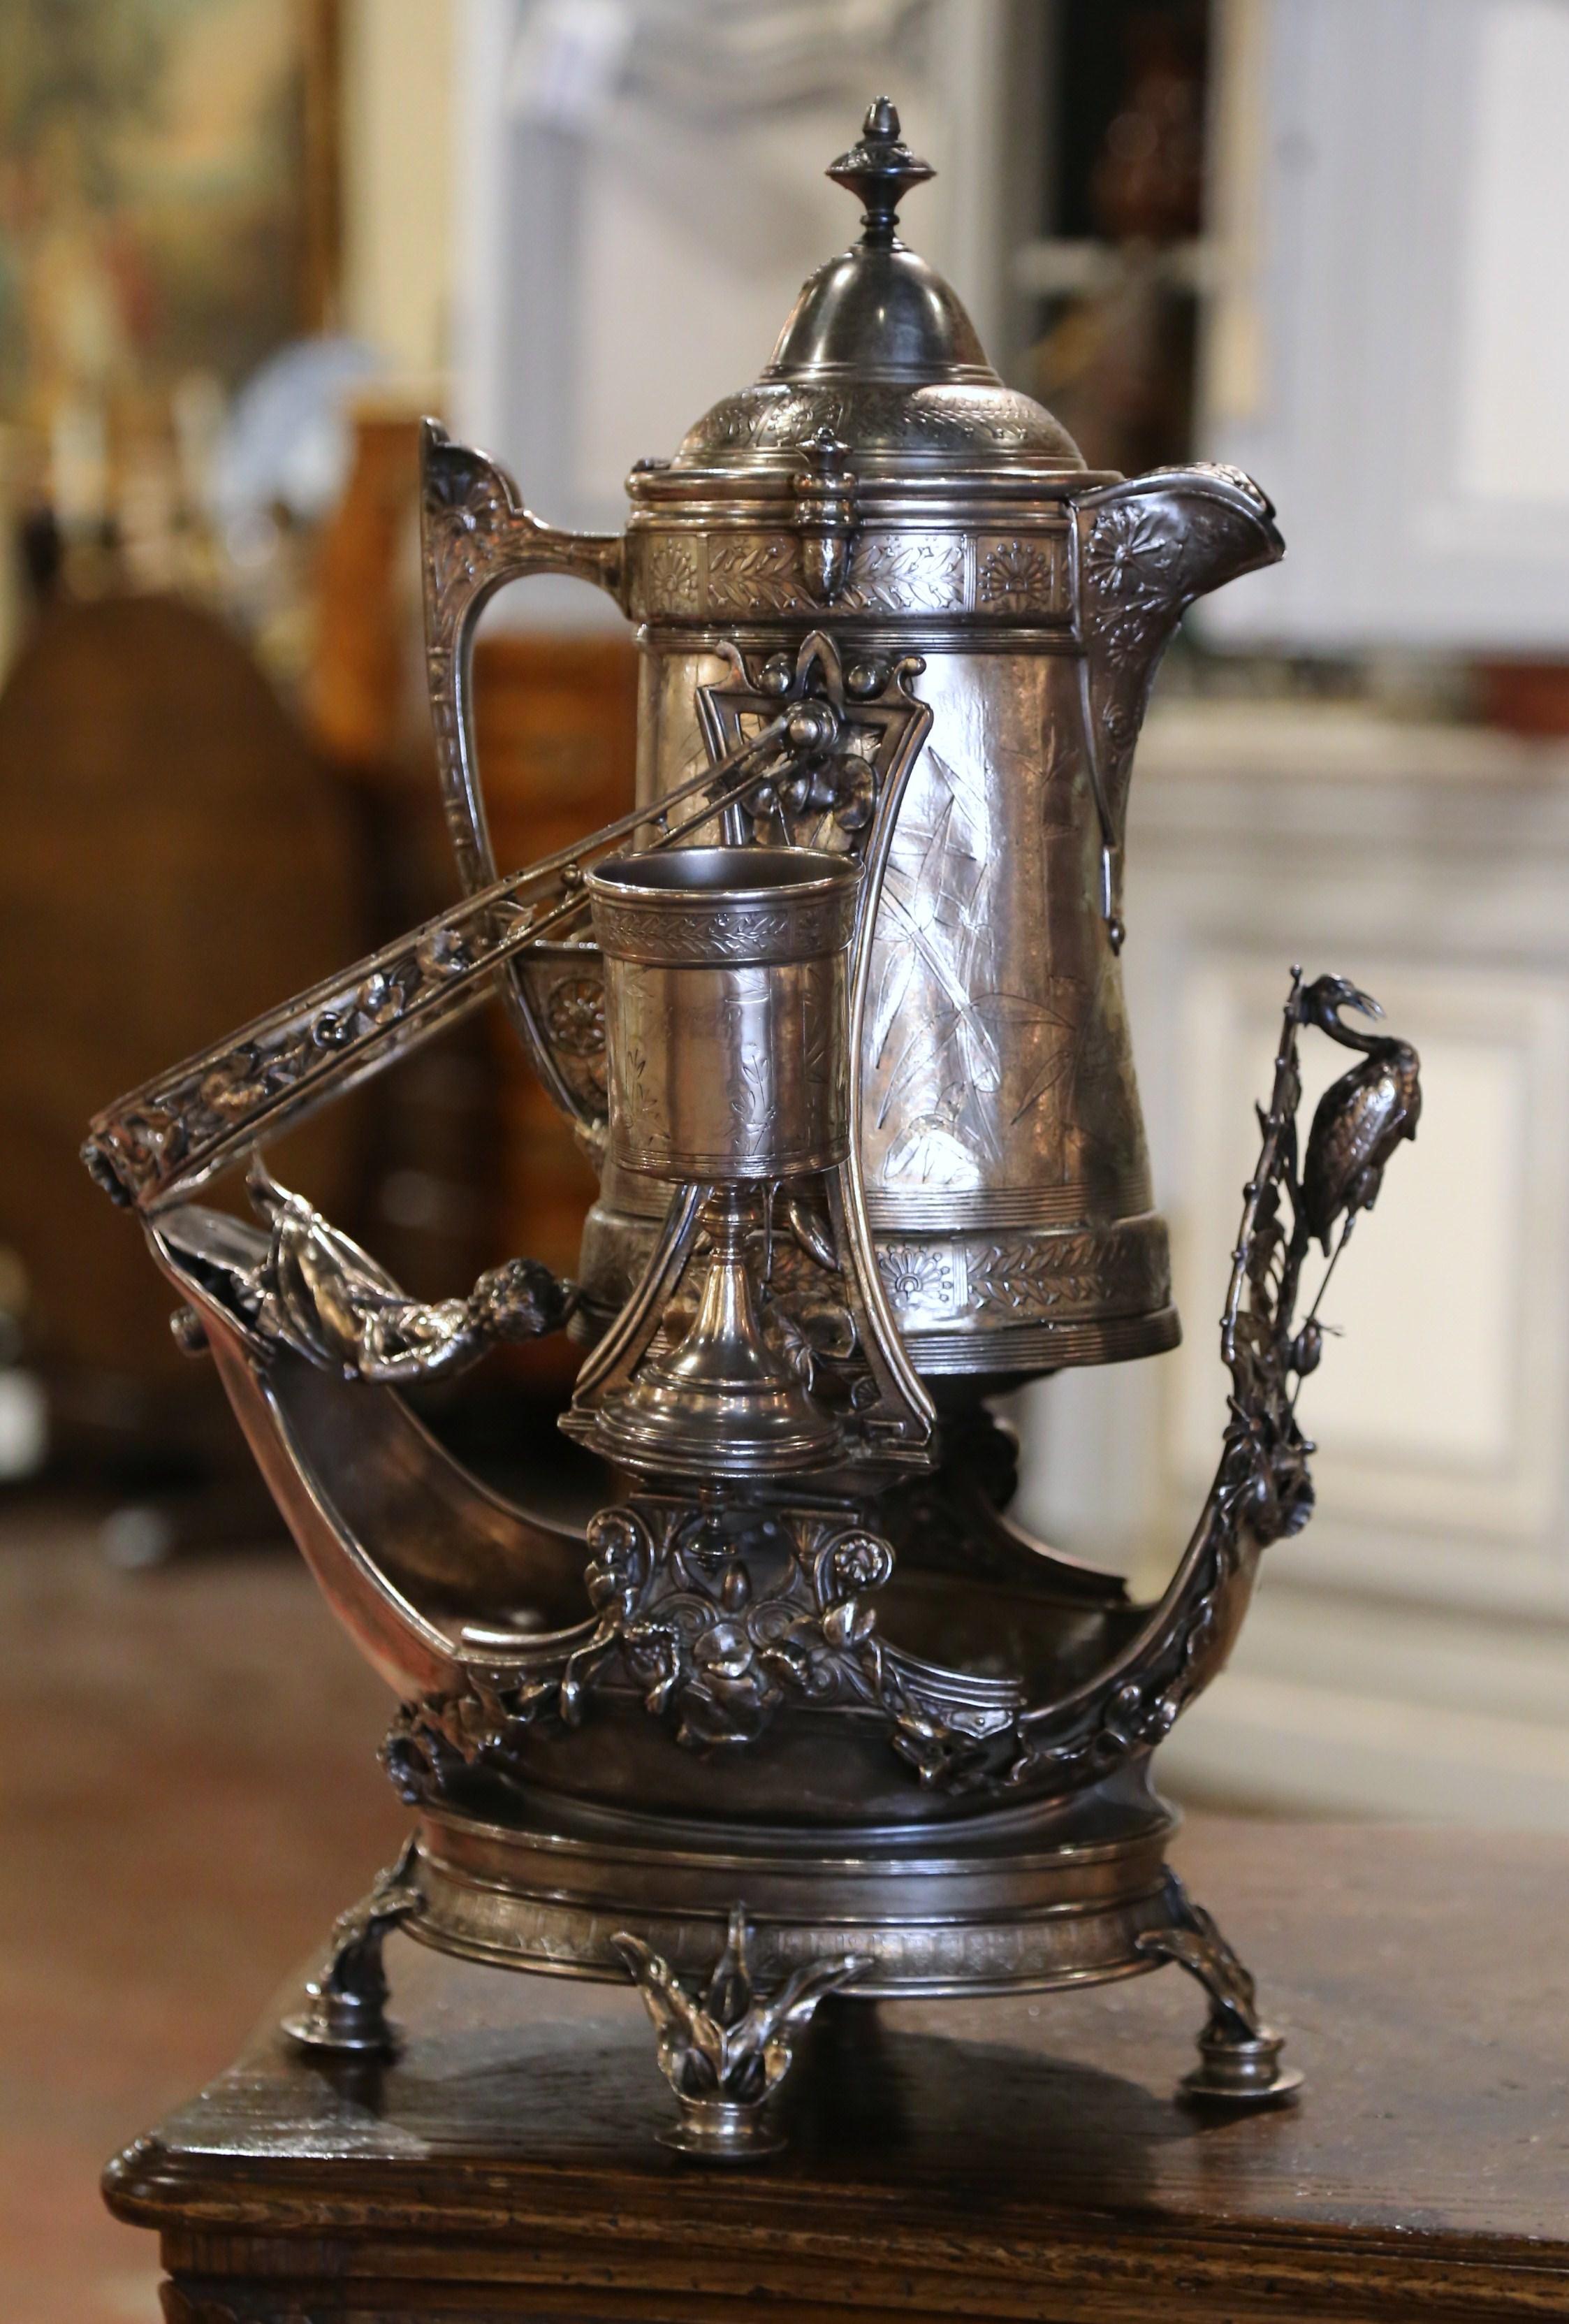 Decorate your bar, cellar or cabinet with this decorative silvered copper samovar. Crafted in England by Reed and Barton circa 1905, the tea drinking device stands on a tilt stand; the container is accompanied by two exquisite goblets. Ideal for